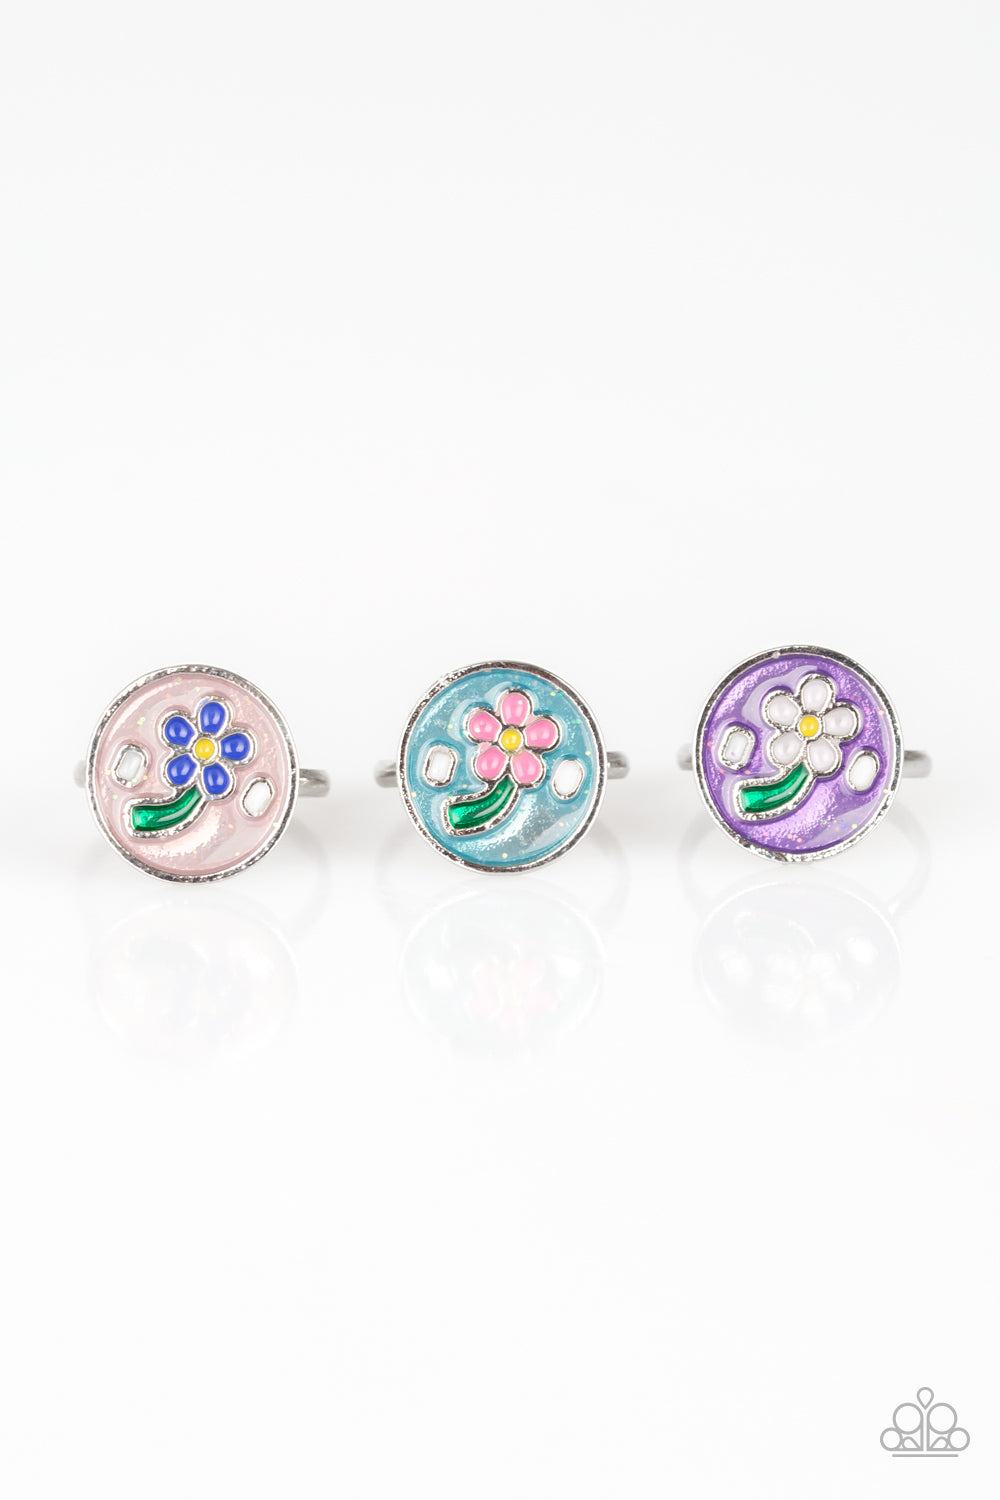 Paparazzi Starlet Shimmer Rings - 10 - Round Painted Flowers - $5 Jewelry With Ashley Swint